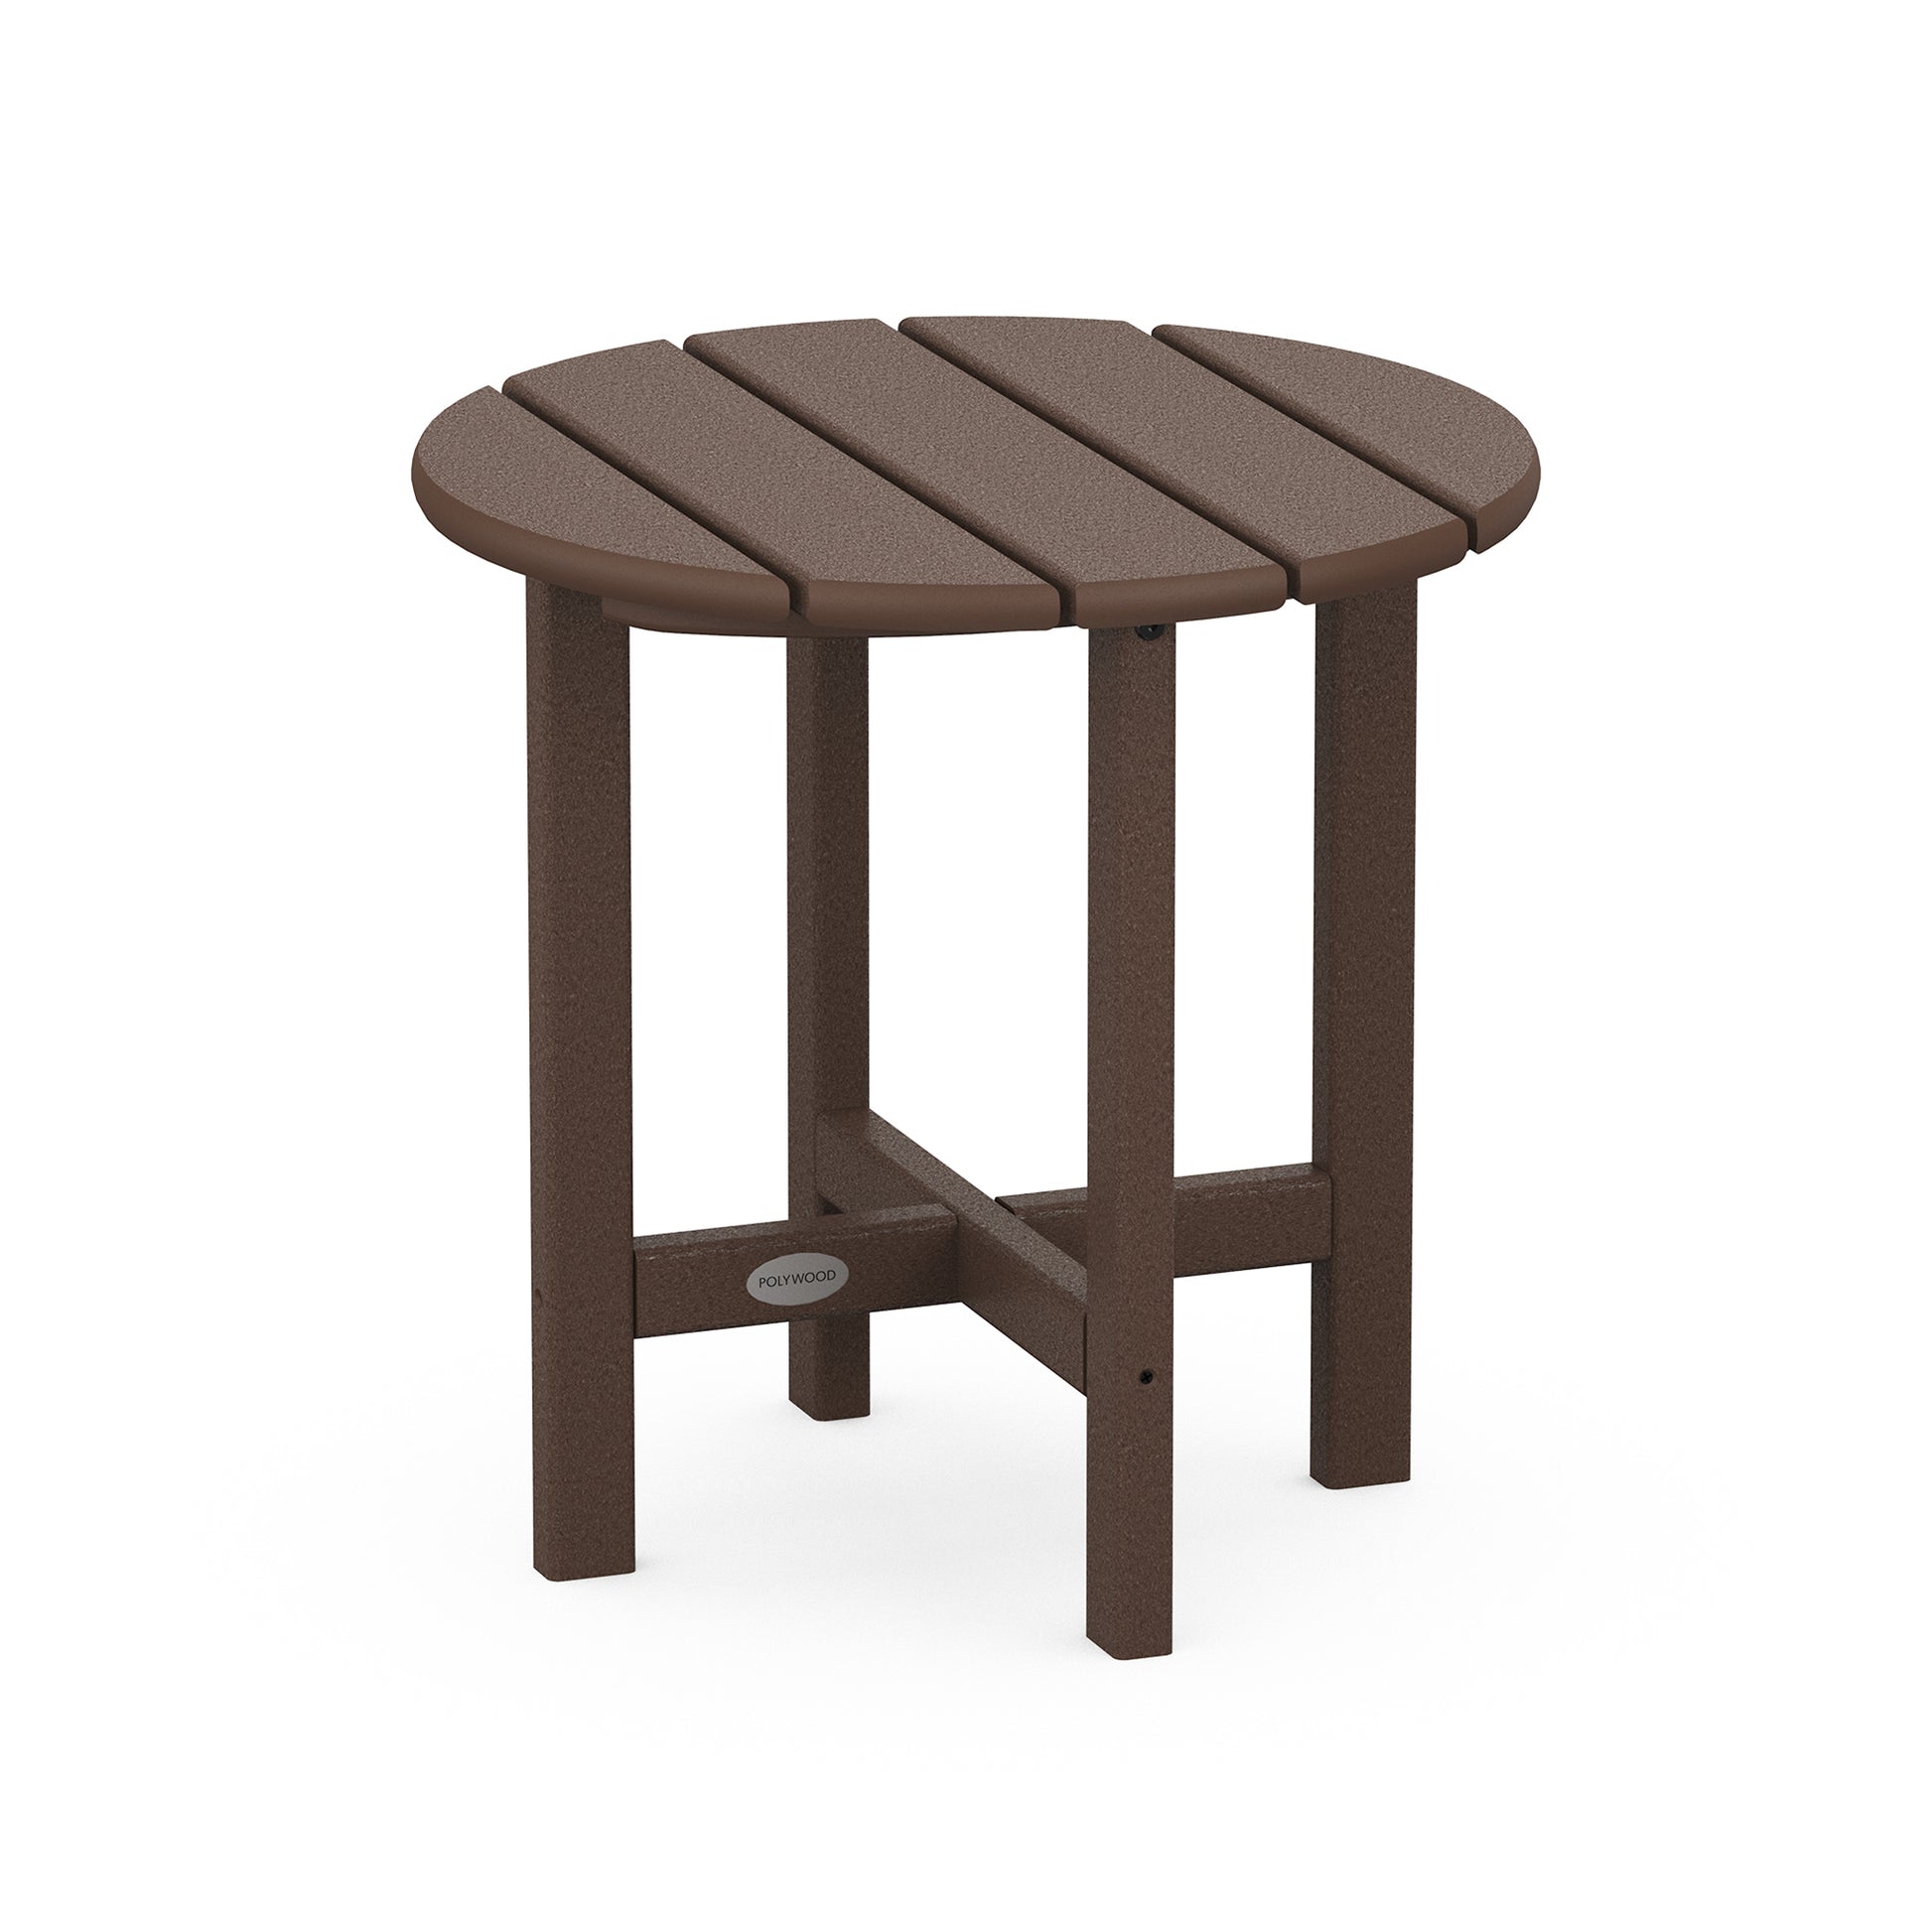 A small, round POLYWOOD® outdoor table with a slatted top and four sturdy legs, constructed from textured brown plastic. The POLYWOOD 18" Round Side Table is designed for durability and easy maintenance.